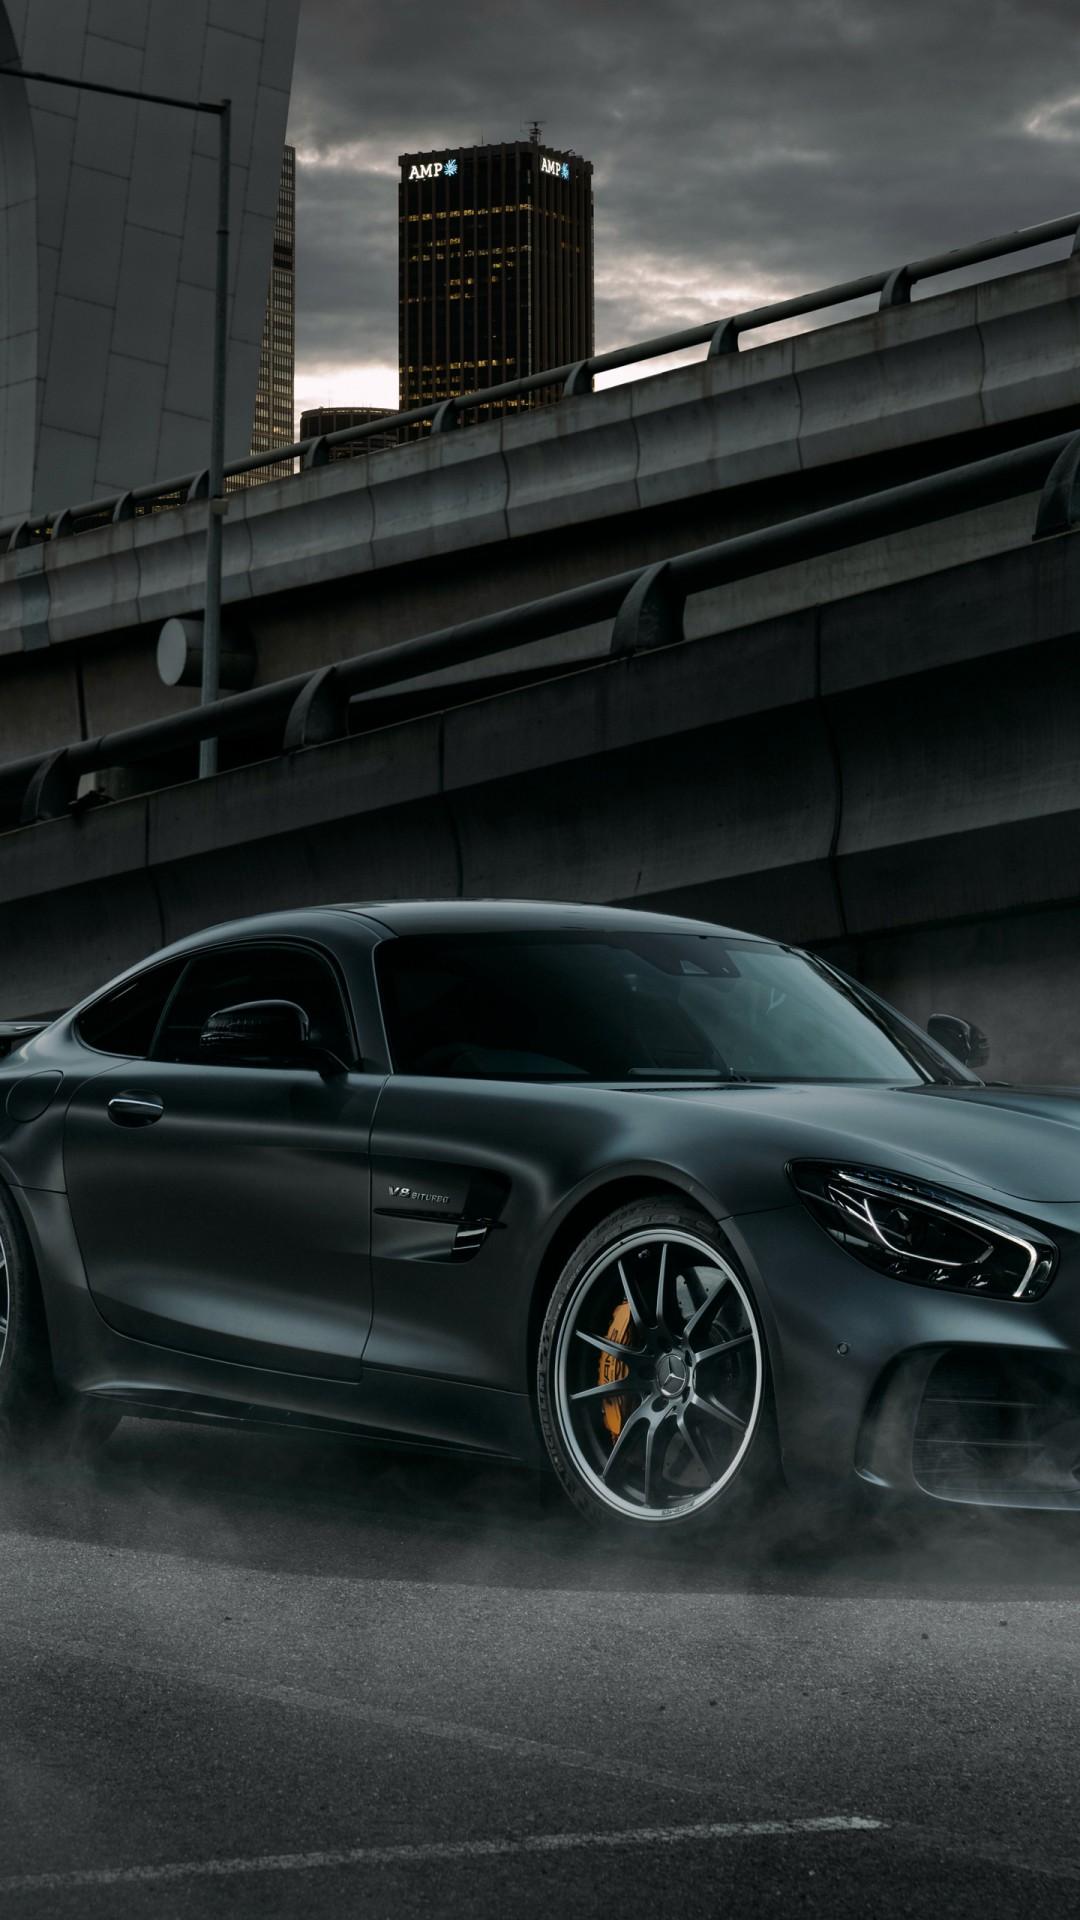 Free Download Mercedes Amg Gt And Benz Car Wallpaper for Desktop and Mobiles iPhone 6 / 6S Plus